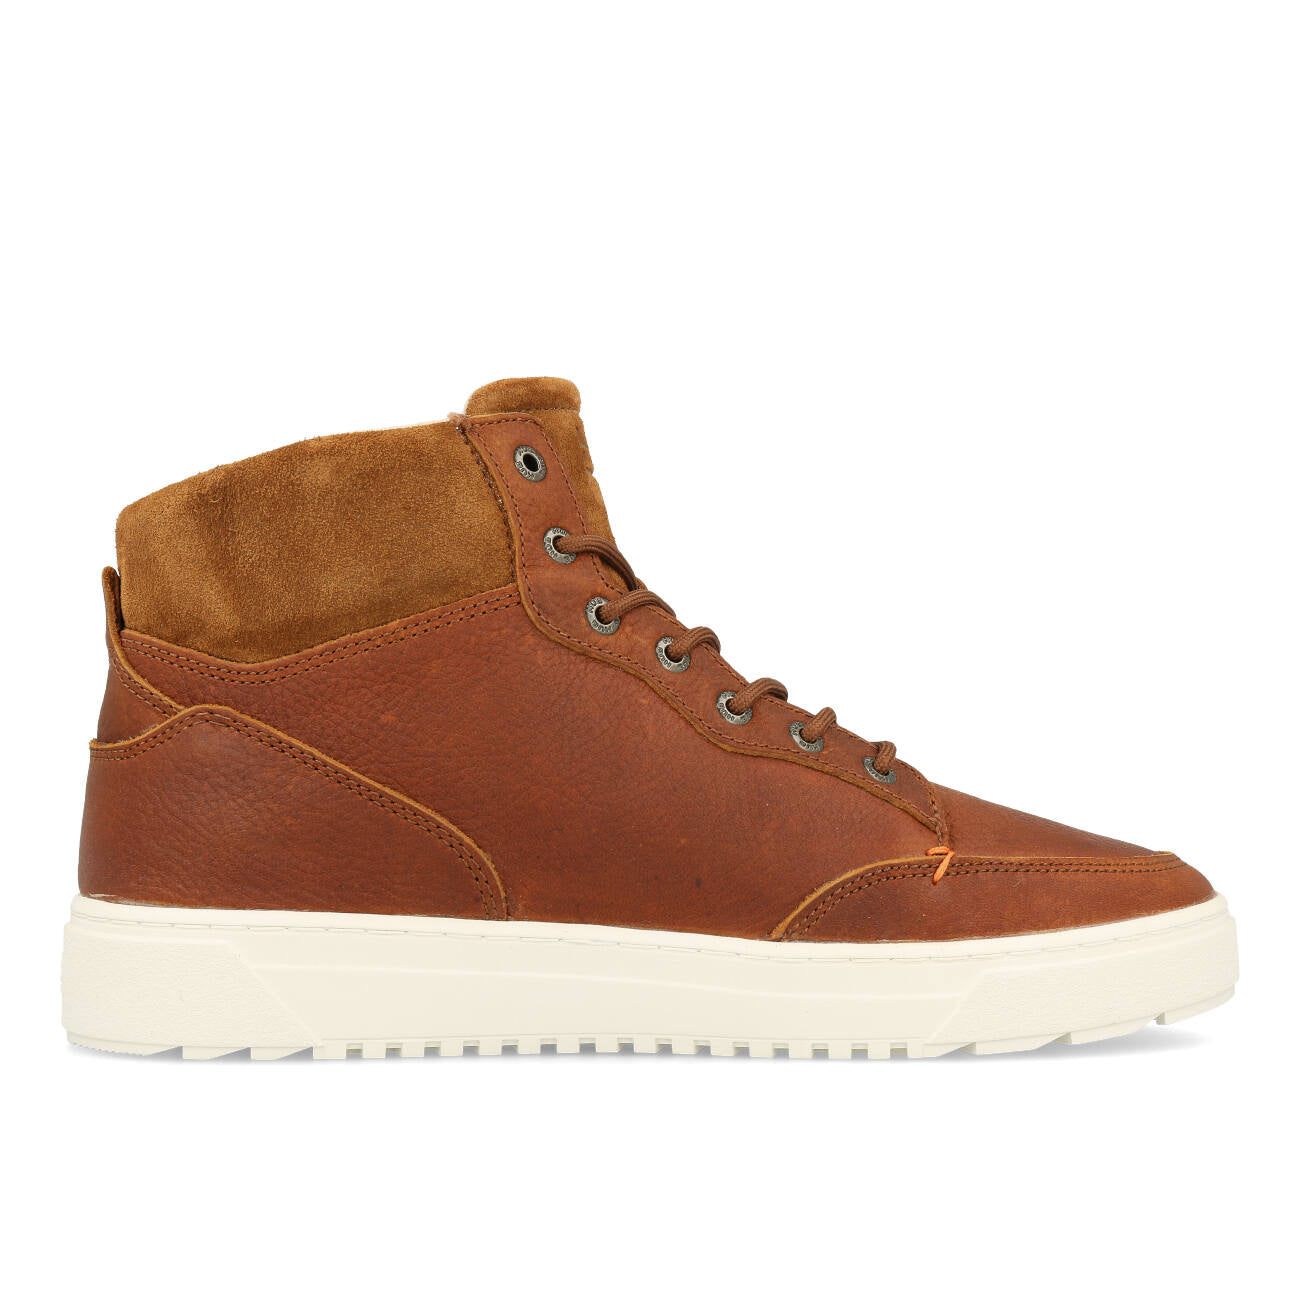 HUB Dundee L52 Leather Suede Herren Cognac Off White